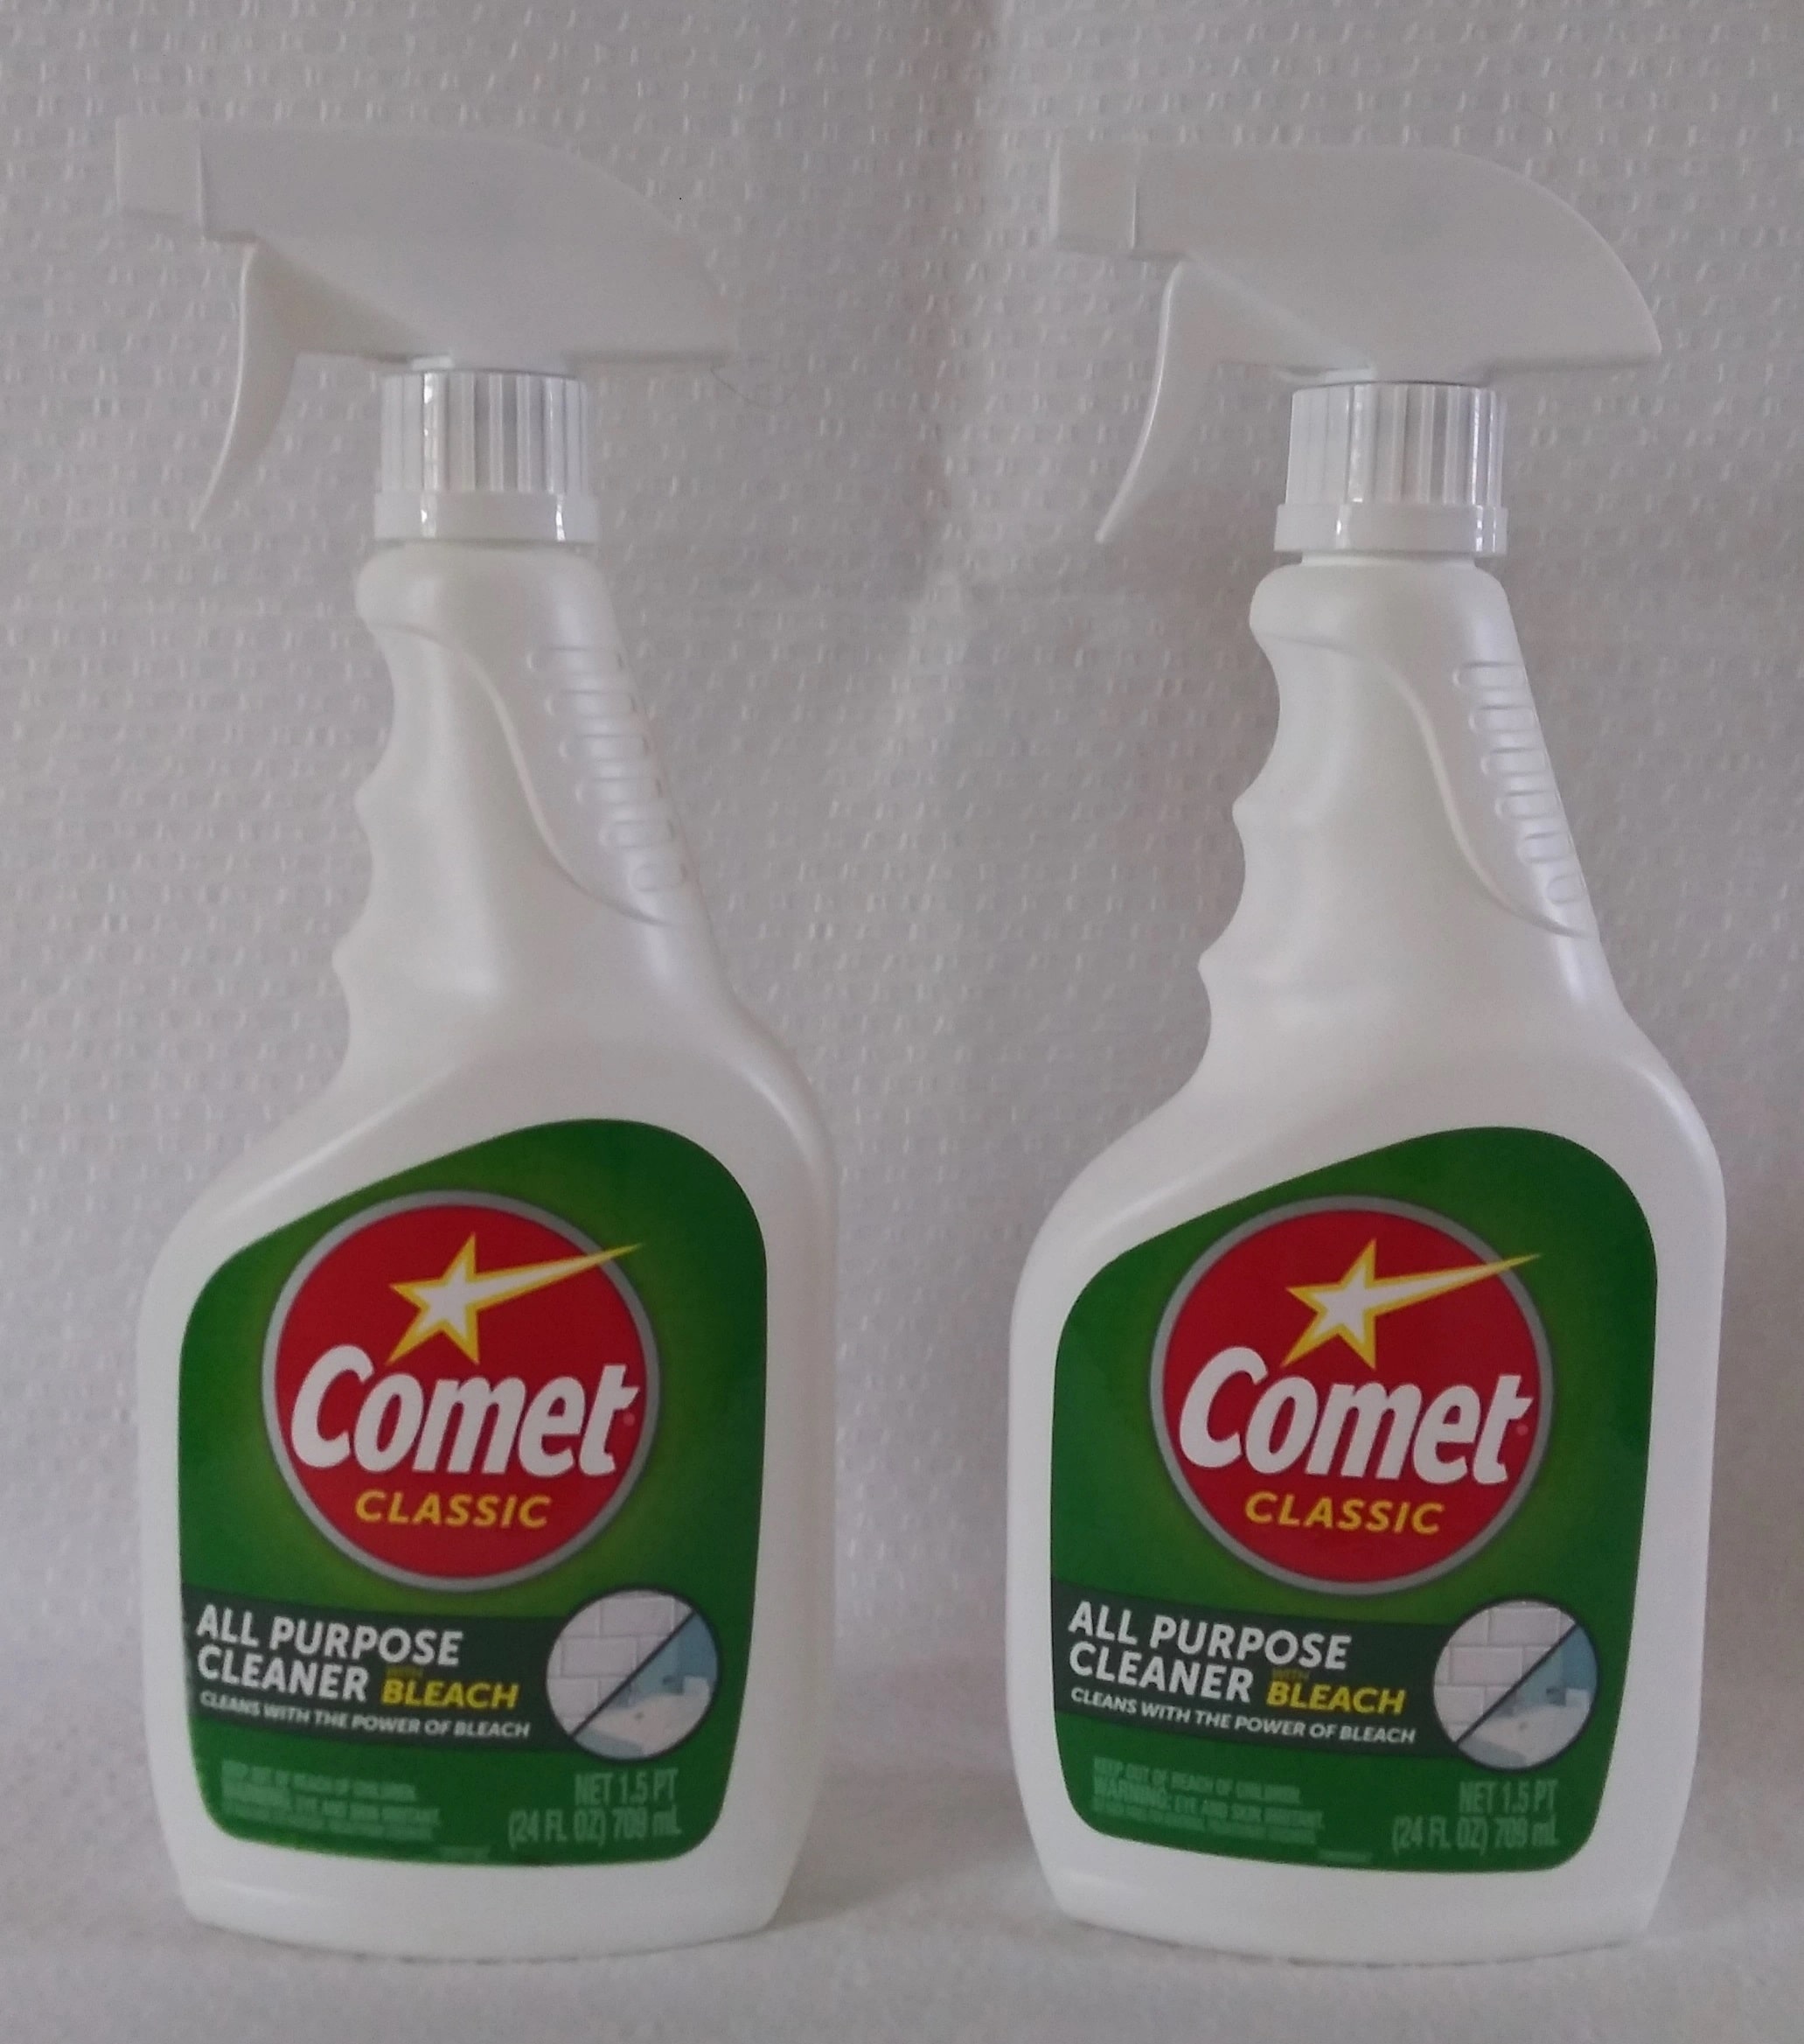 Comet Classic All Purpose Cleaner with Bleach - (2-Pack) 24oz x 2 = 48oz